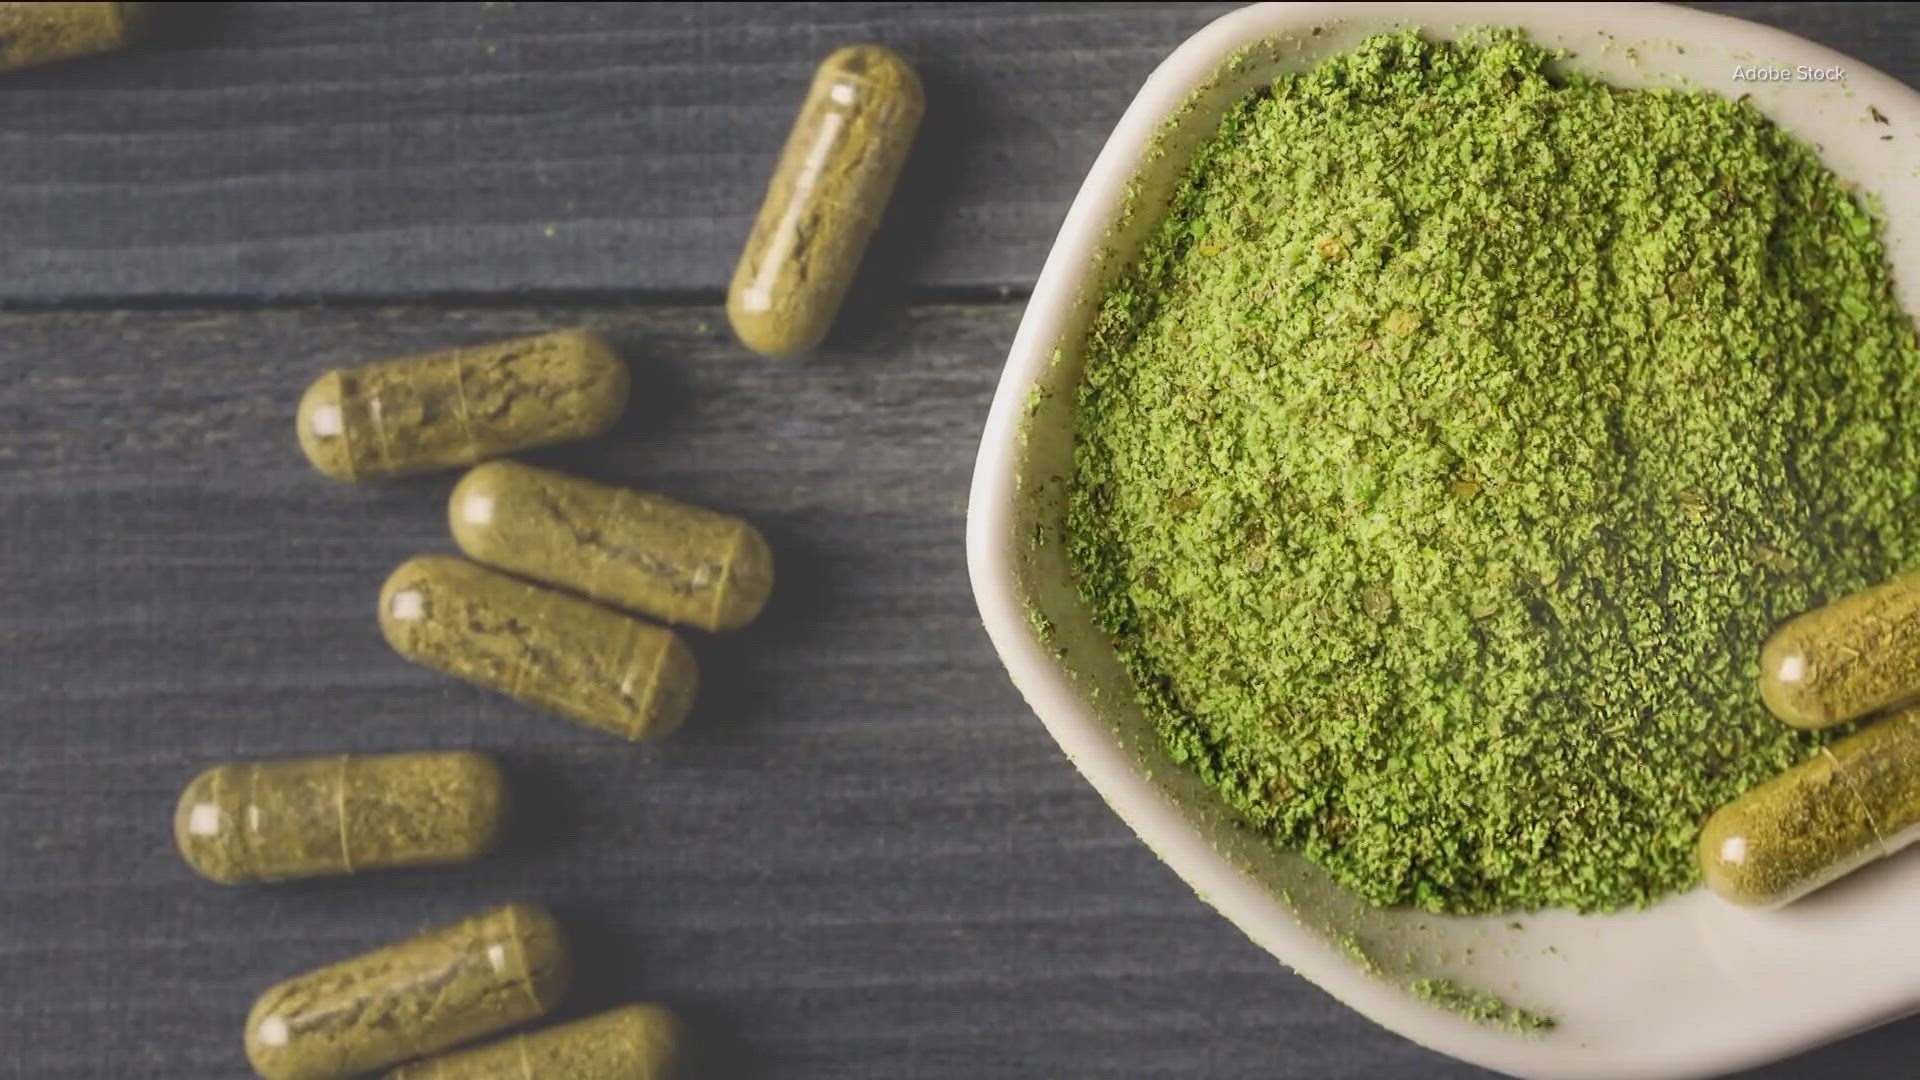 Advocates say the legislation is crucial as Kratom products have been cut with things like fentanyl, heroin and other harmful substances.